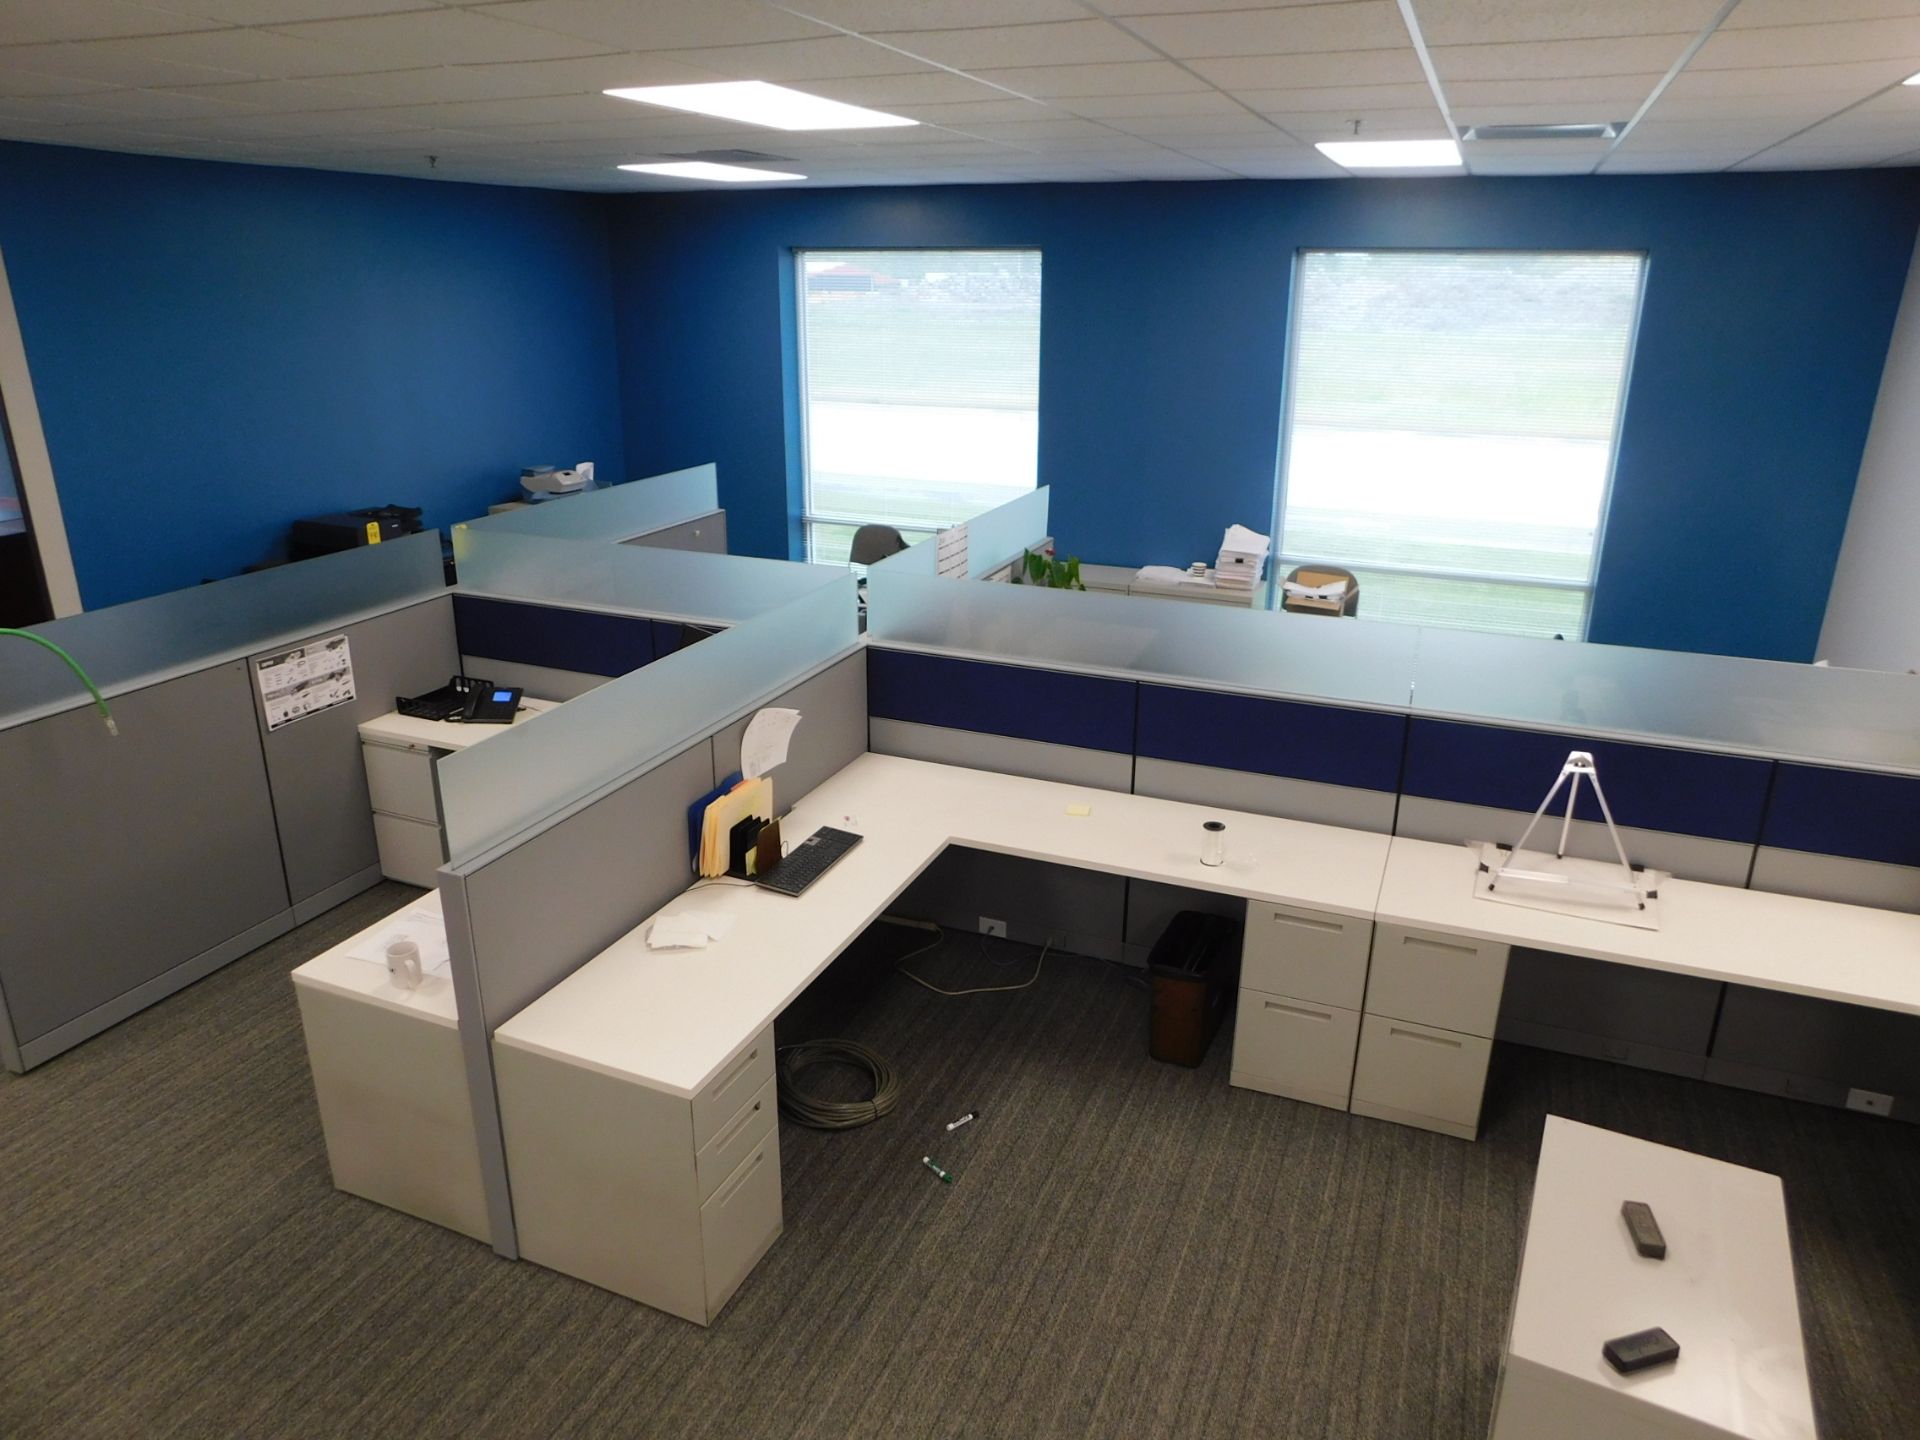 4 Workspace Office Cubical, Complete with Desks and Filing Cabinets